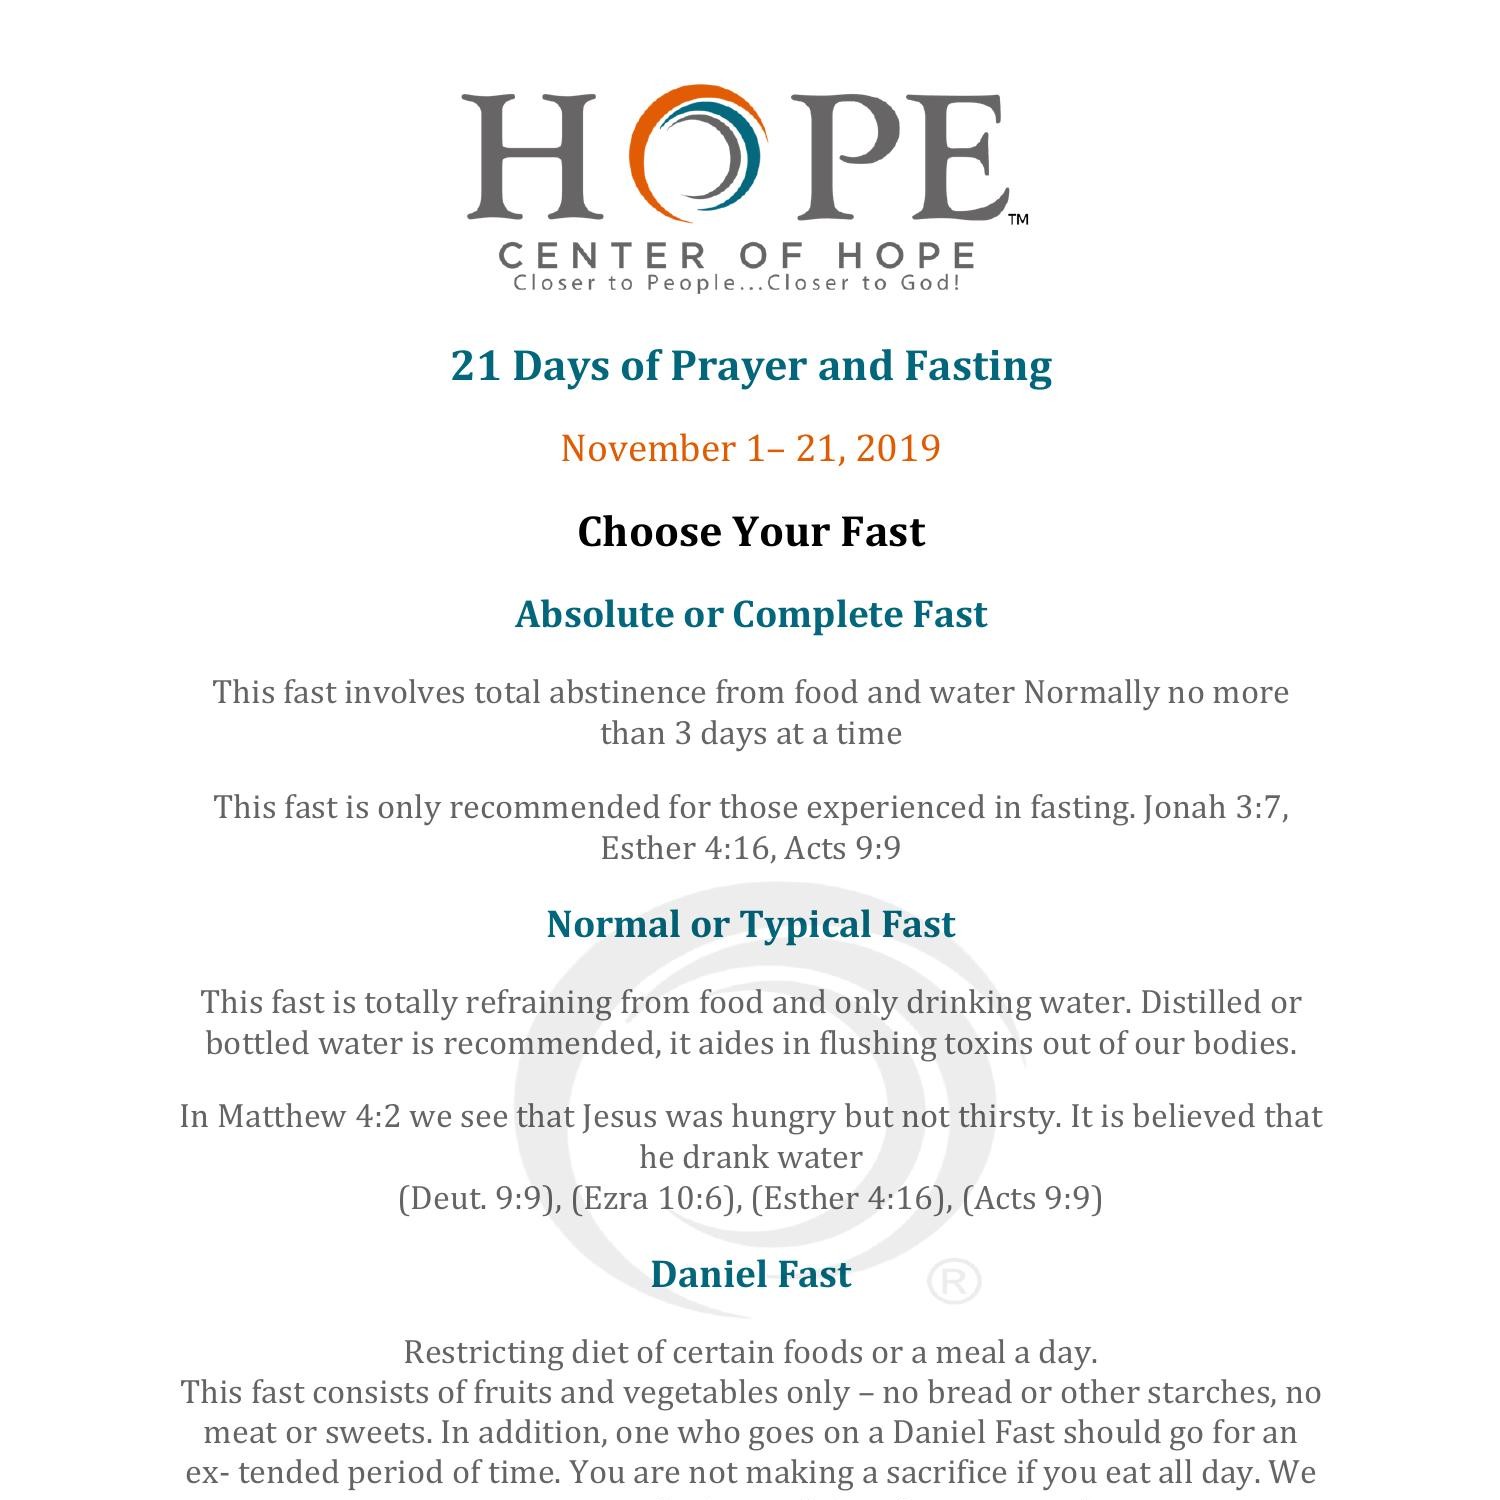 21 Days of Prayer and Fasting.pdf DocDroid